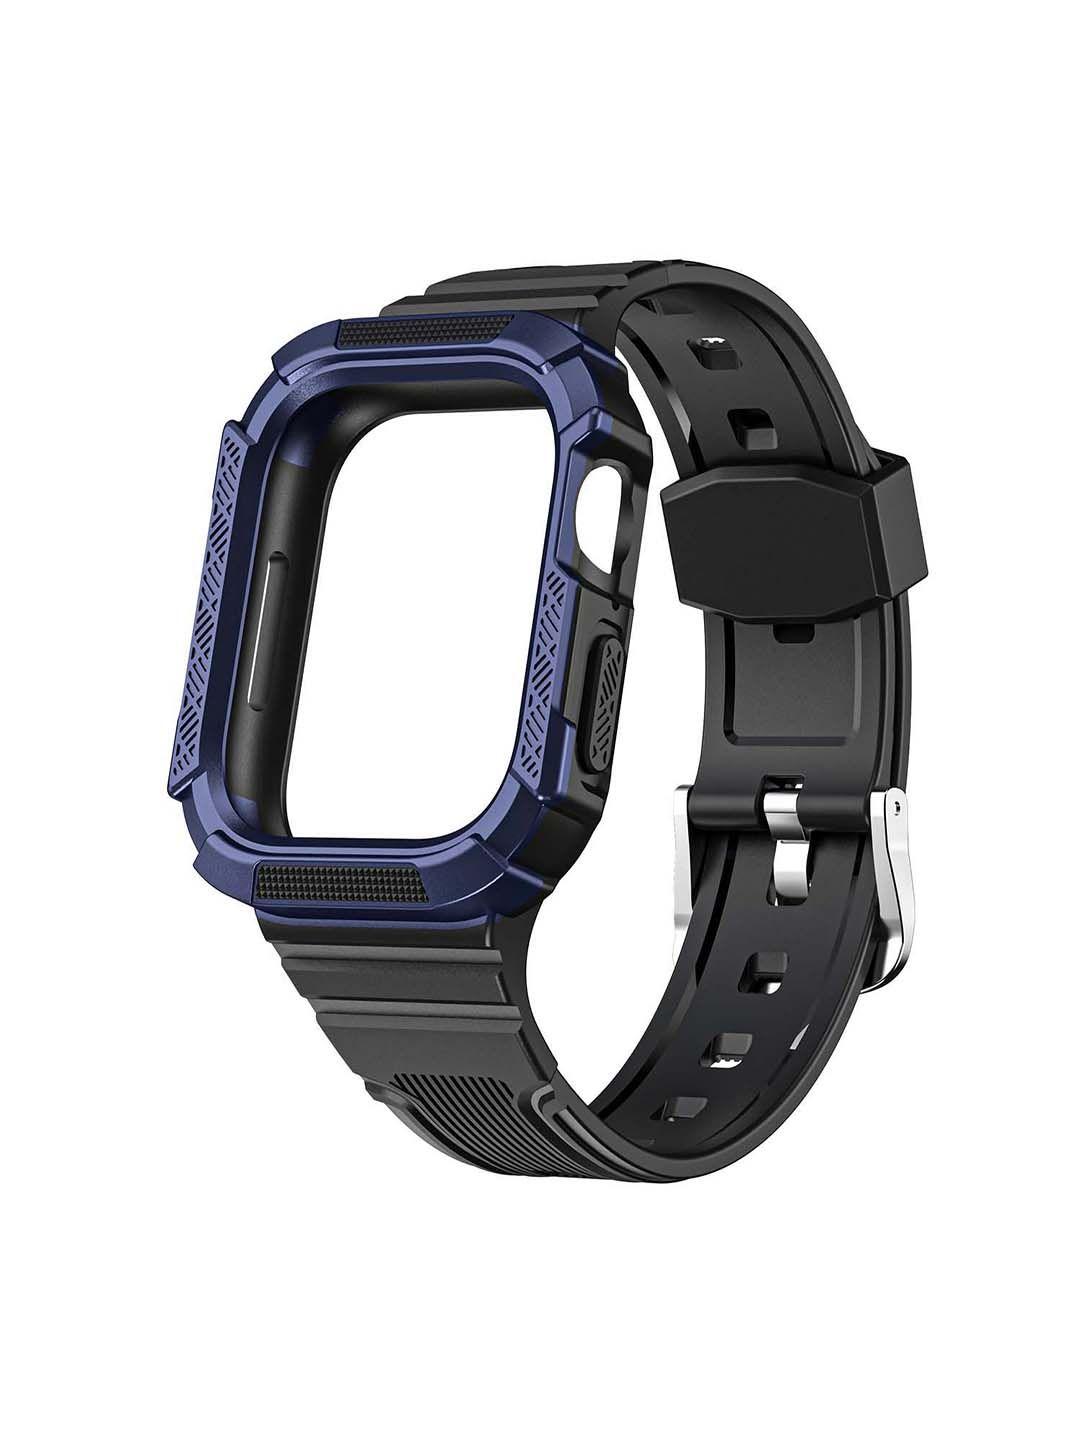 dailyobjects plastic activefit apple watchband with protective bumper case